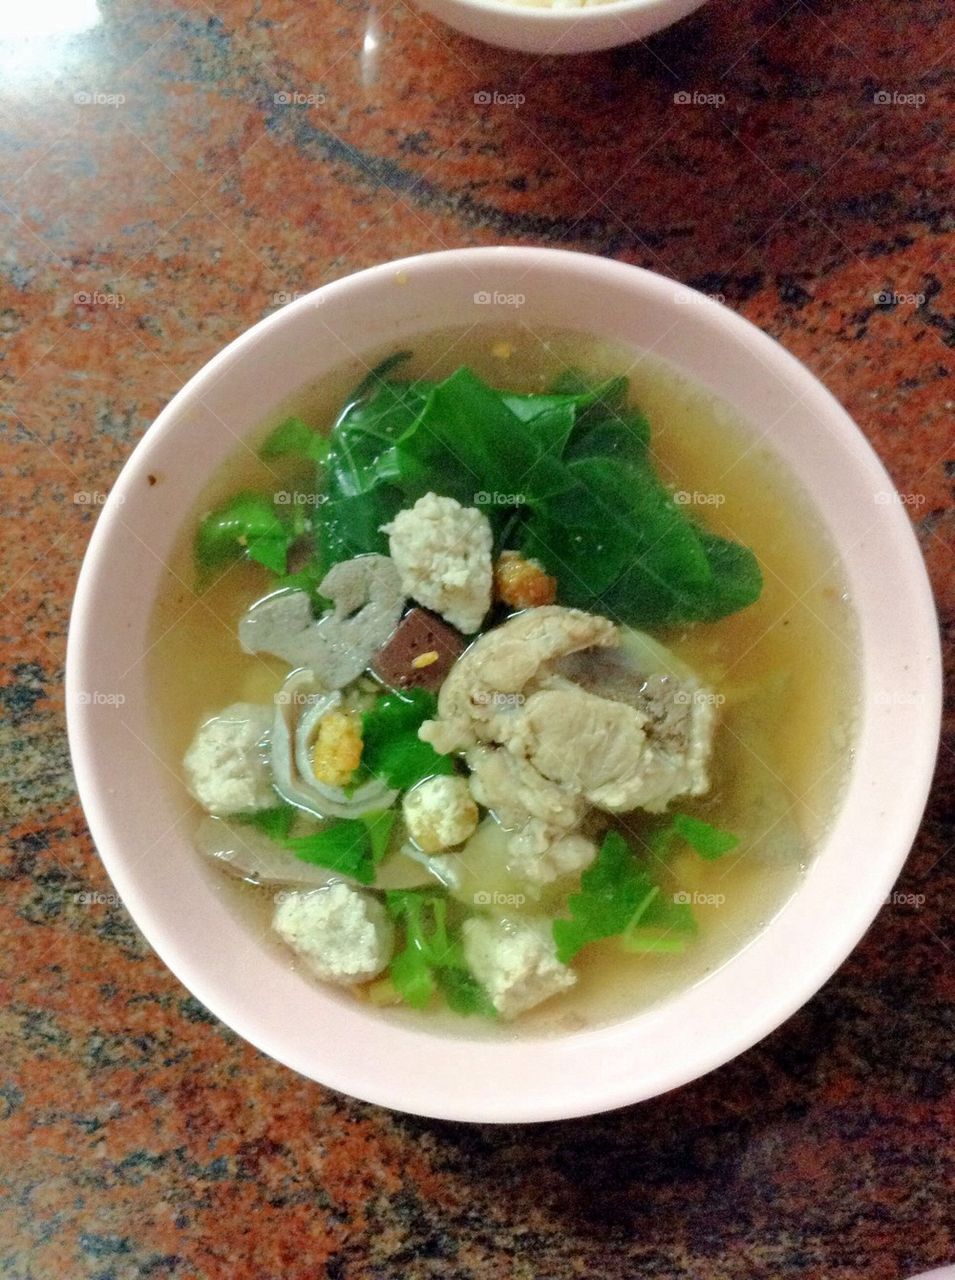 Gourd soup with pork